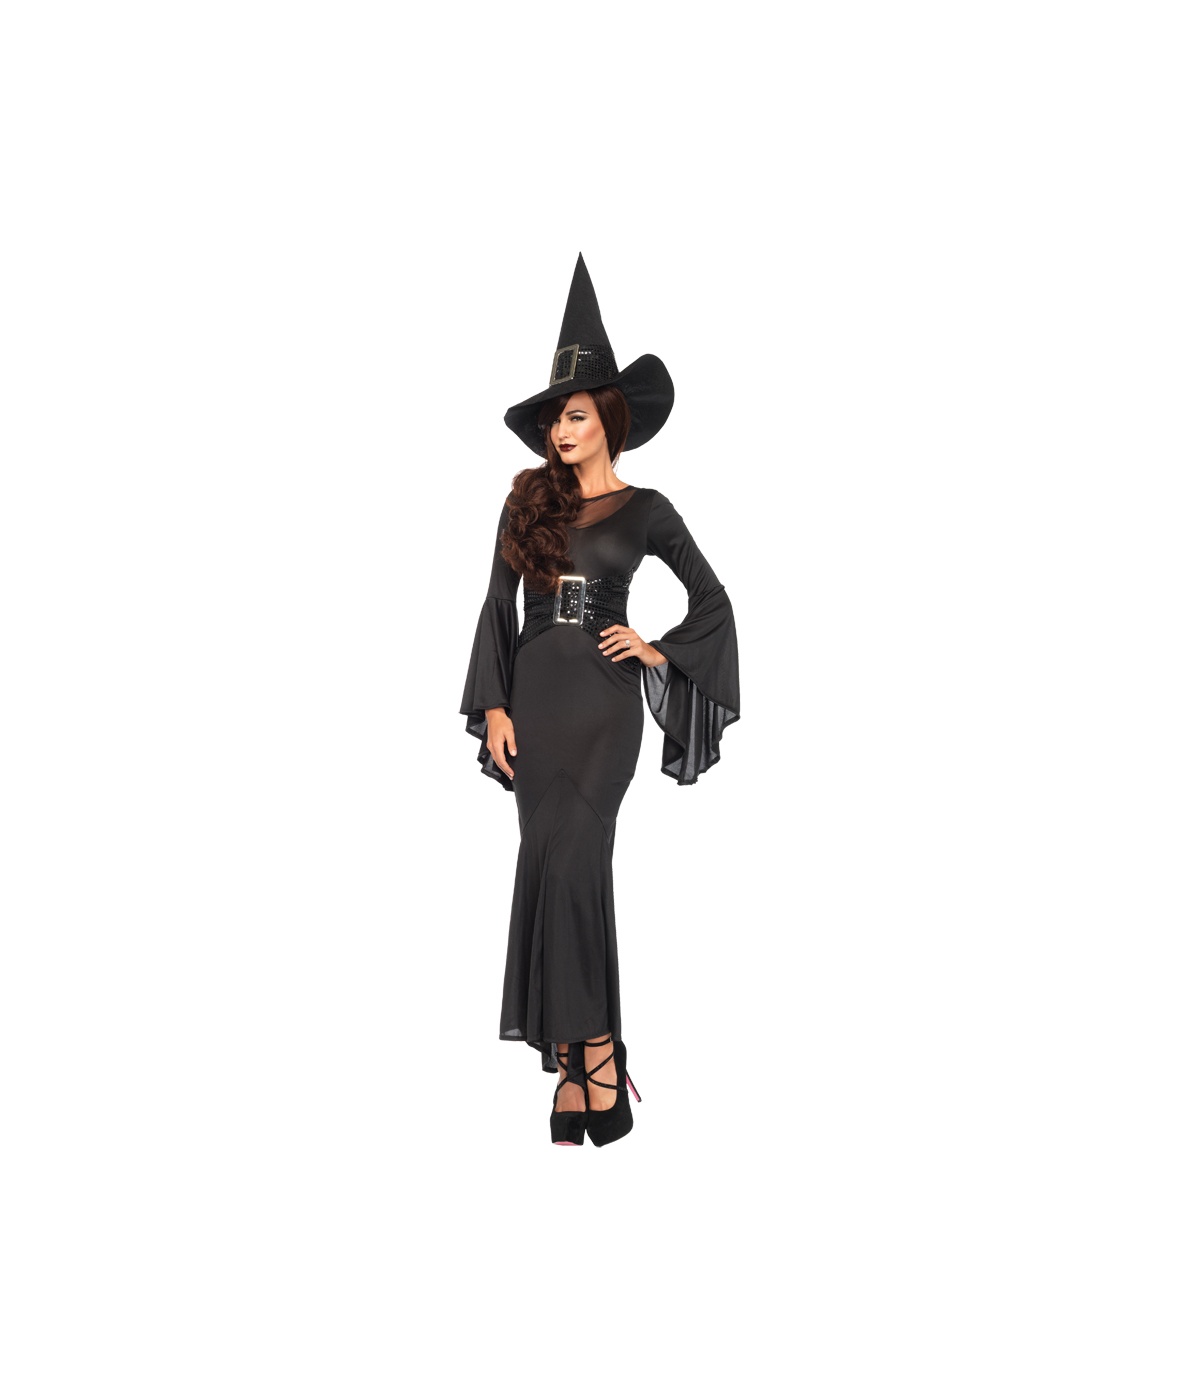  Womens Pitch Black Witchcraft Costume